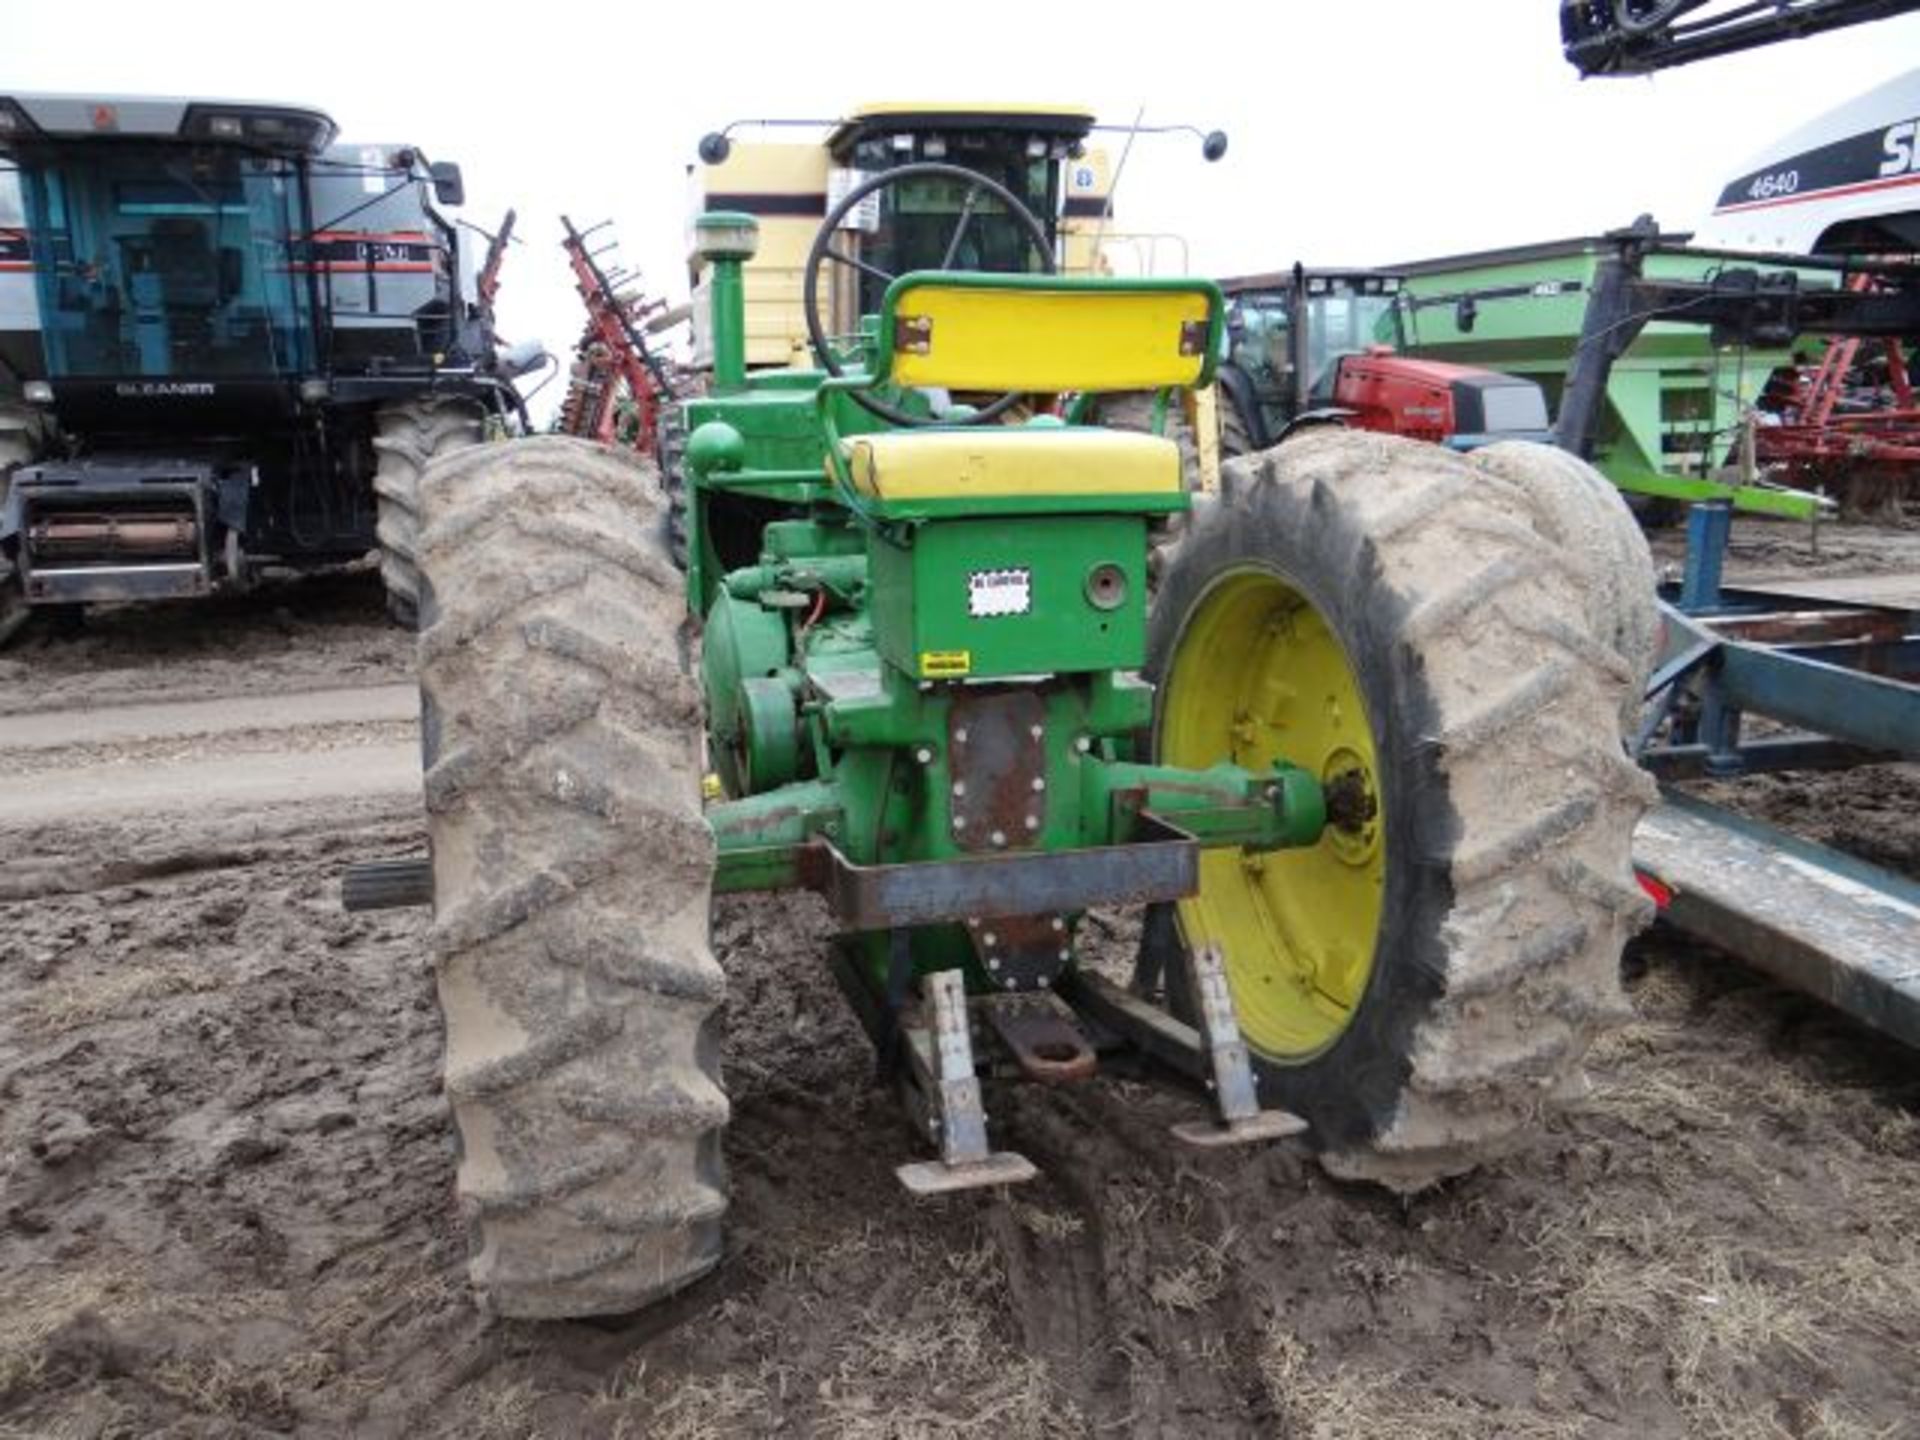 JD G Tractor, 1949 Gas, NF, Pulling Tractor, Weight Bracket and Wheely Bars - Image 3 of 3